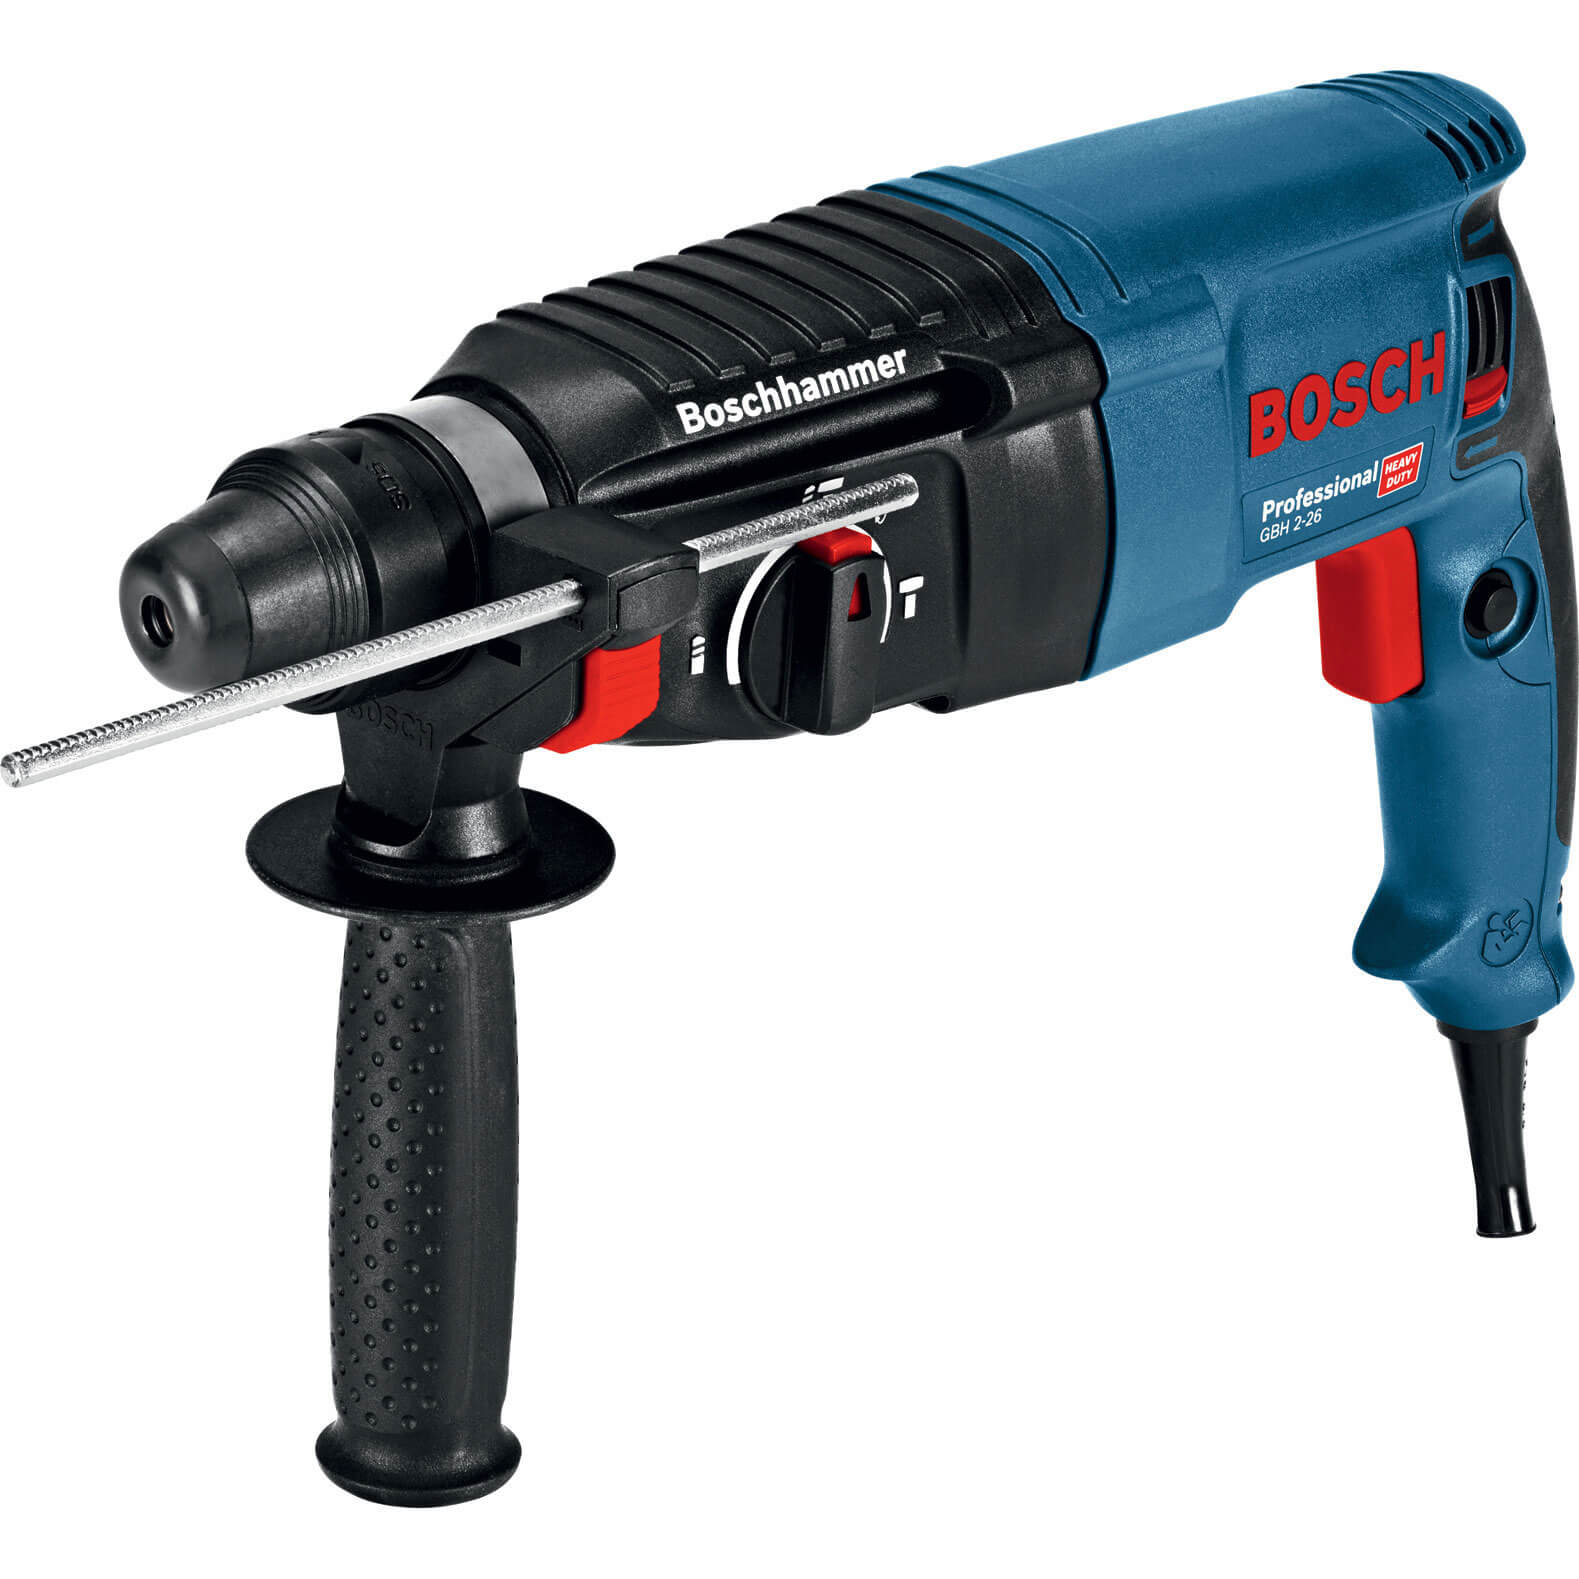 Image of Bosch GBH 2 26 SDS Plus 3 Mode Rotary Hammer Drill 110v